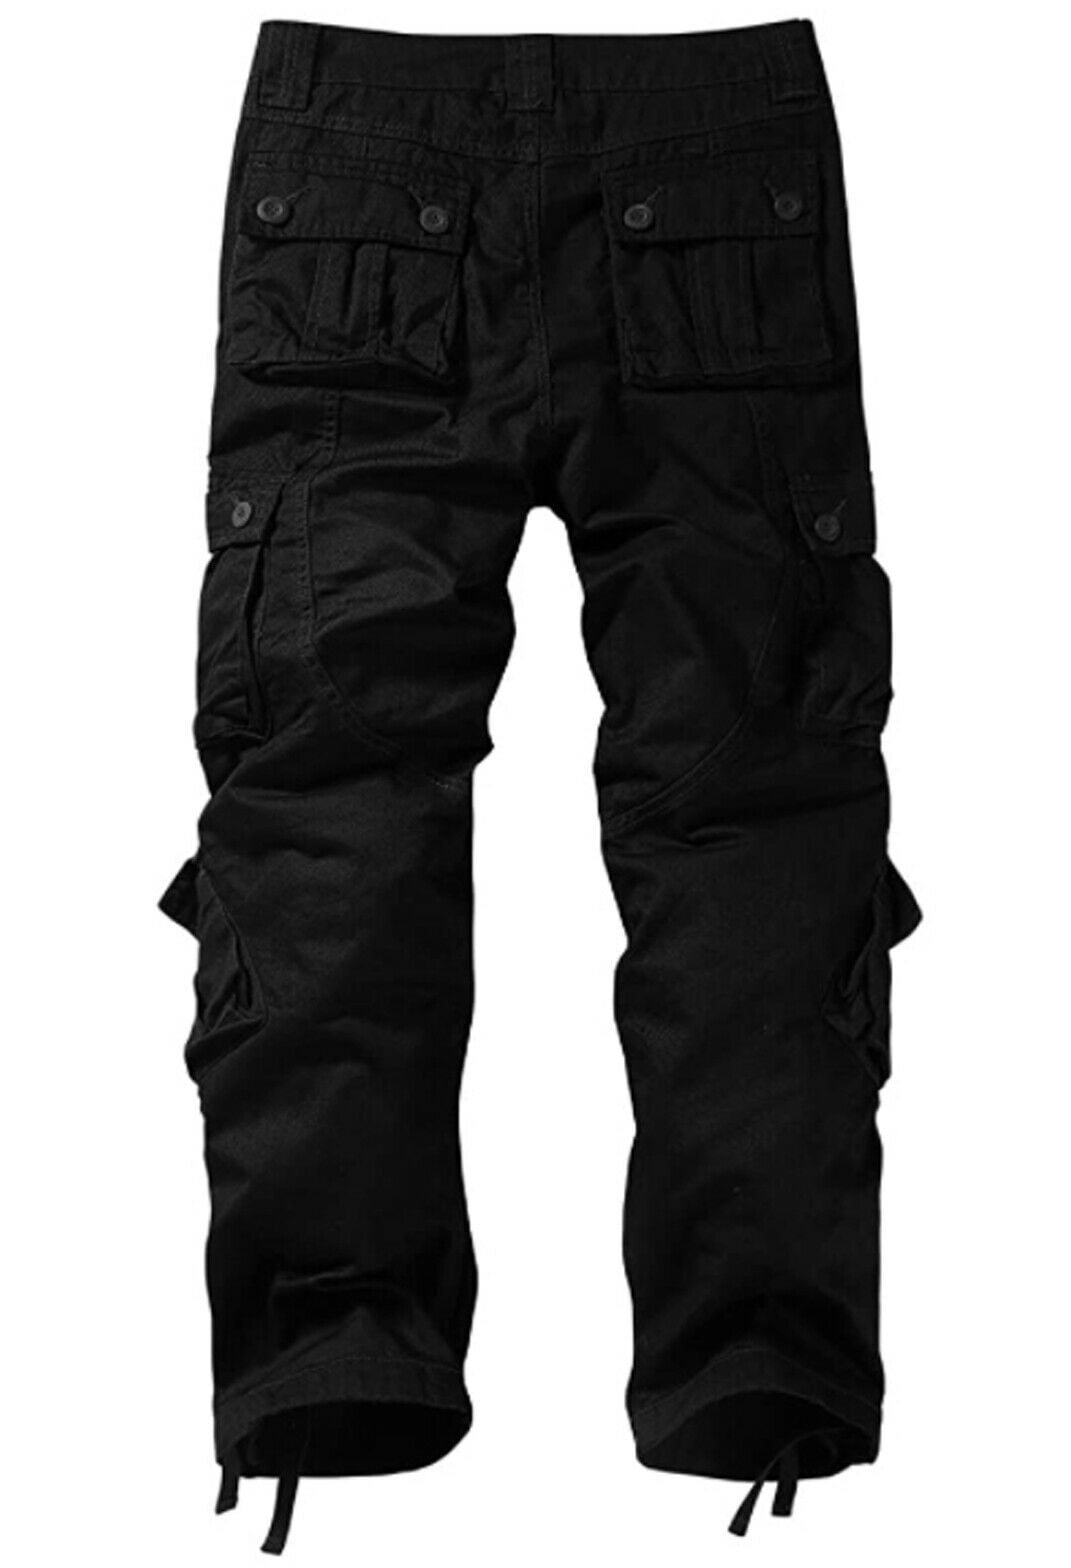 Rungo Tactical Pants camouflage Military Cargo Pants Men Military Work  Casual Trouser Black | Shopee Philippines